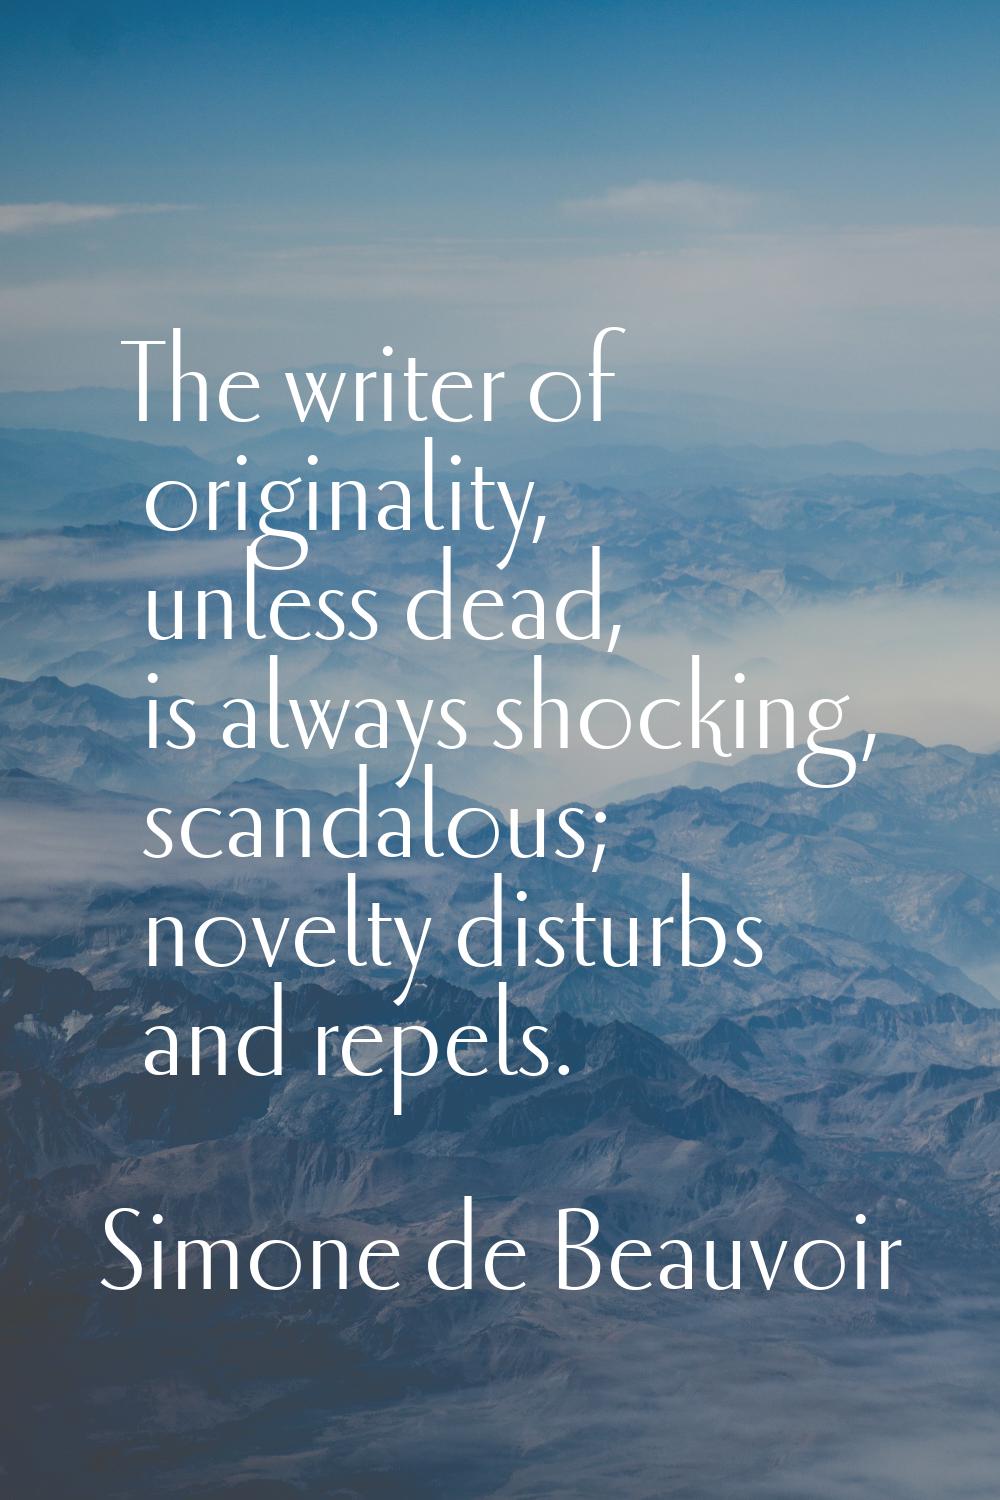 The writer of originality, unless dead, is always shocking, scandalous; novelty disturbs and repels